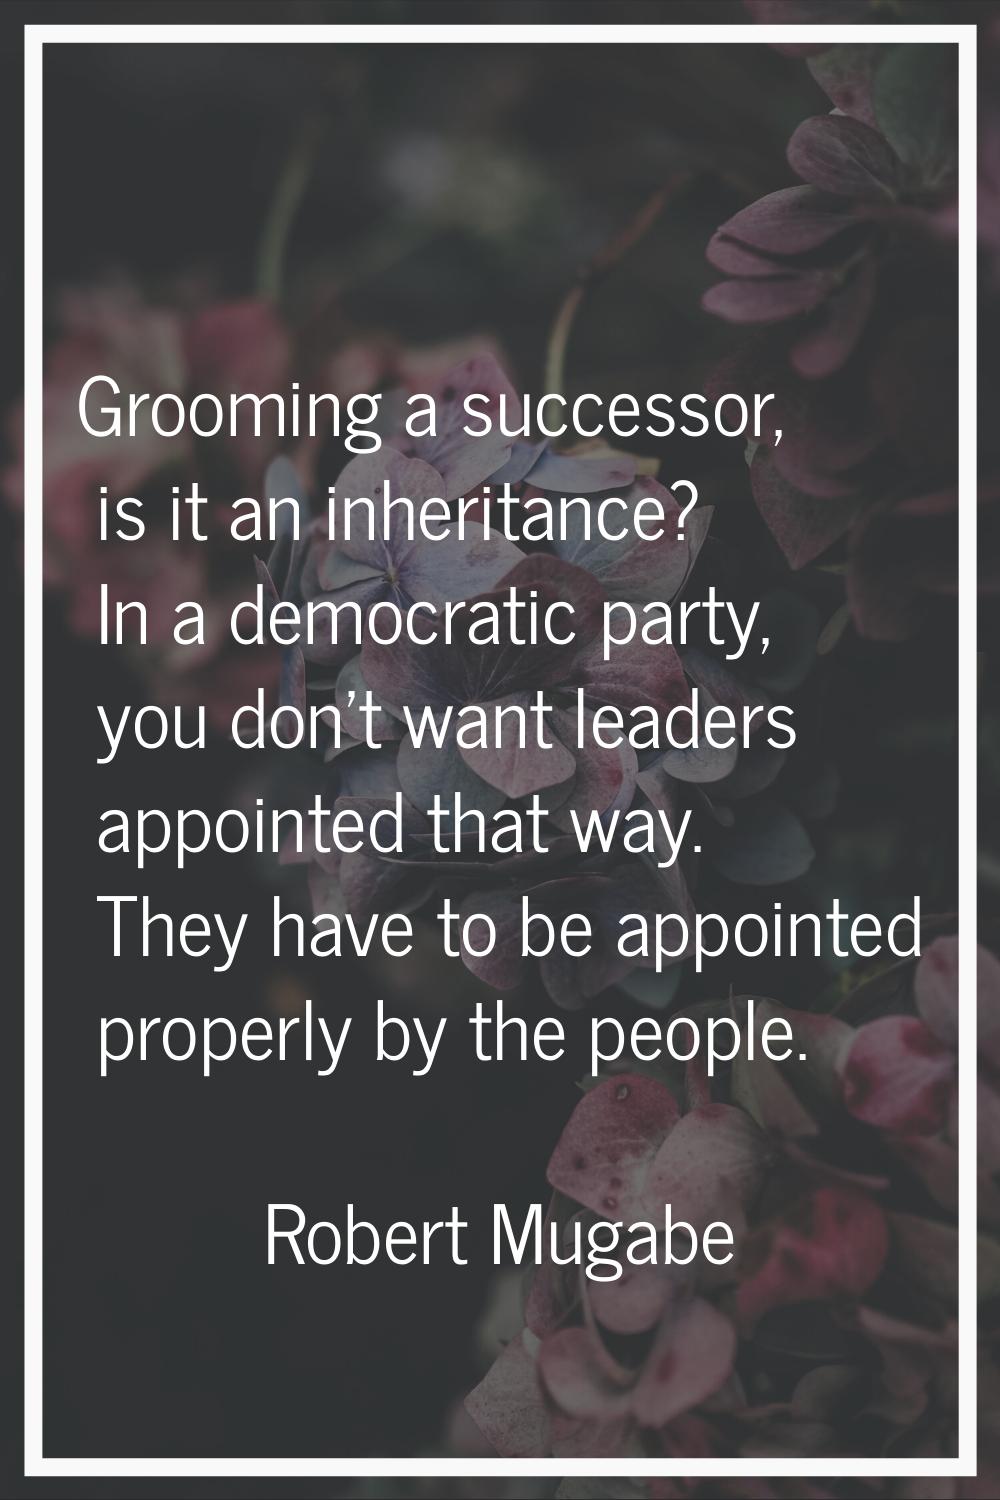 Grooming a successor, is it an inheritance? In a democratic party, you don't want leaders appointed